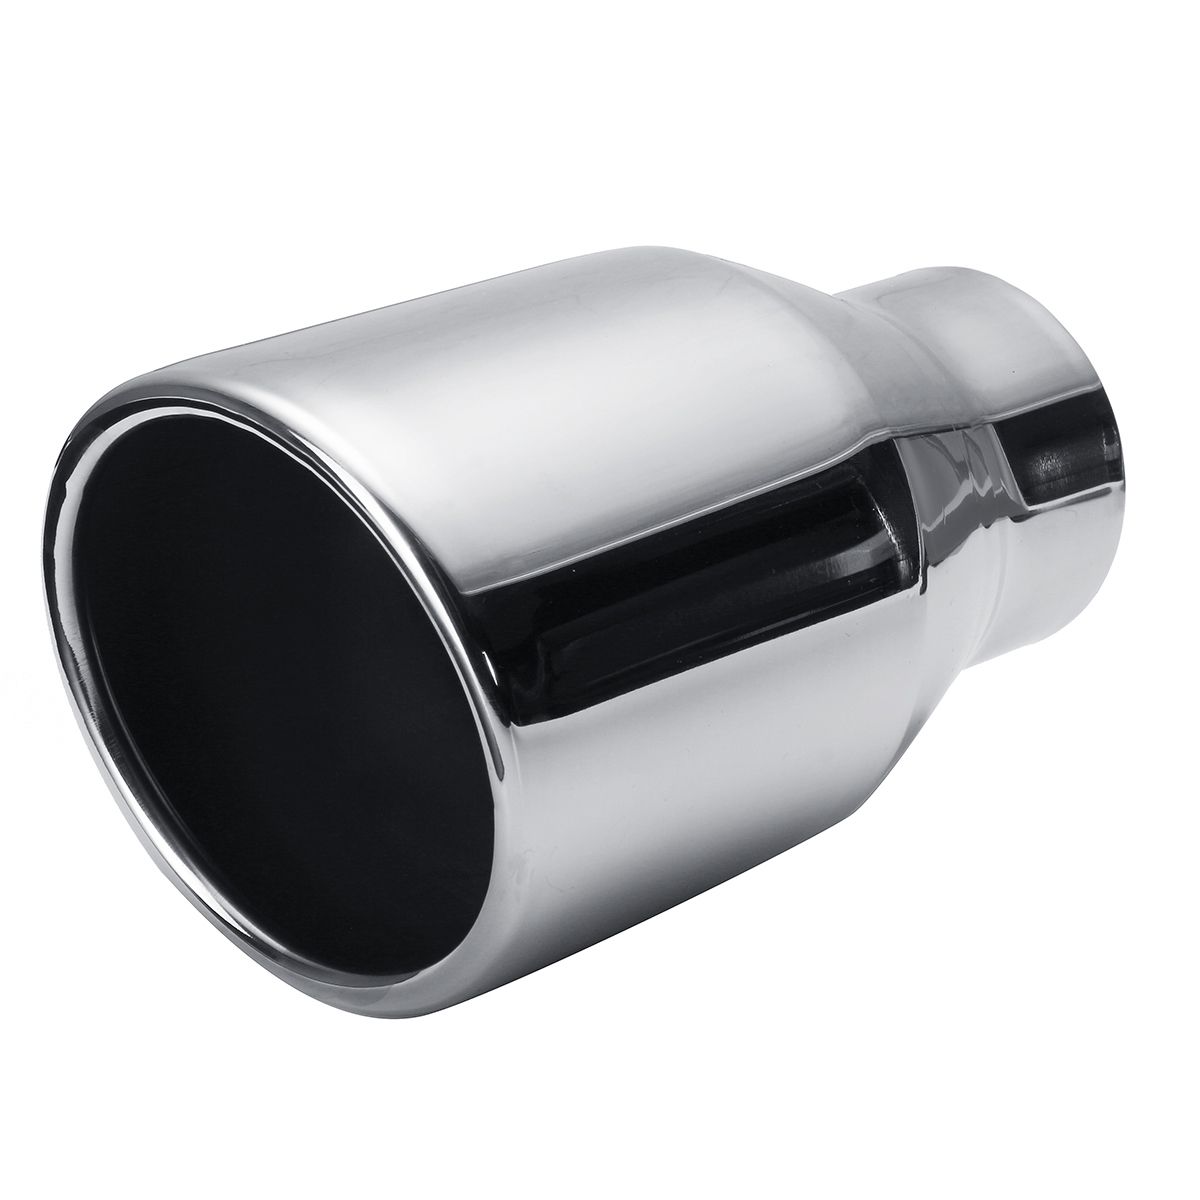 63mm-102mm-Chrome-Stainless-Steel-Car-Round-Rear-Pipe-Tail-Exhaust-Muffler-Tip-1443566